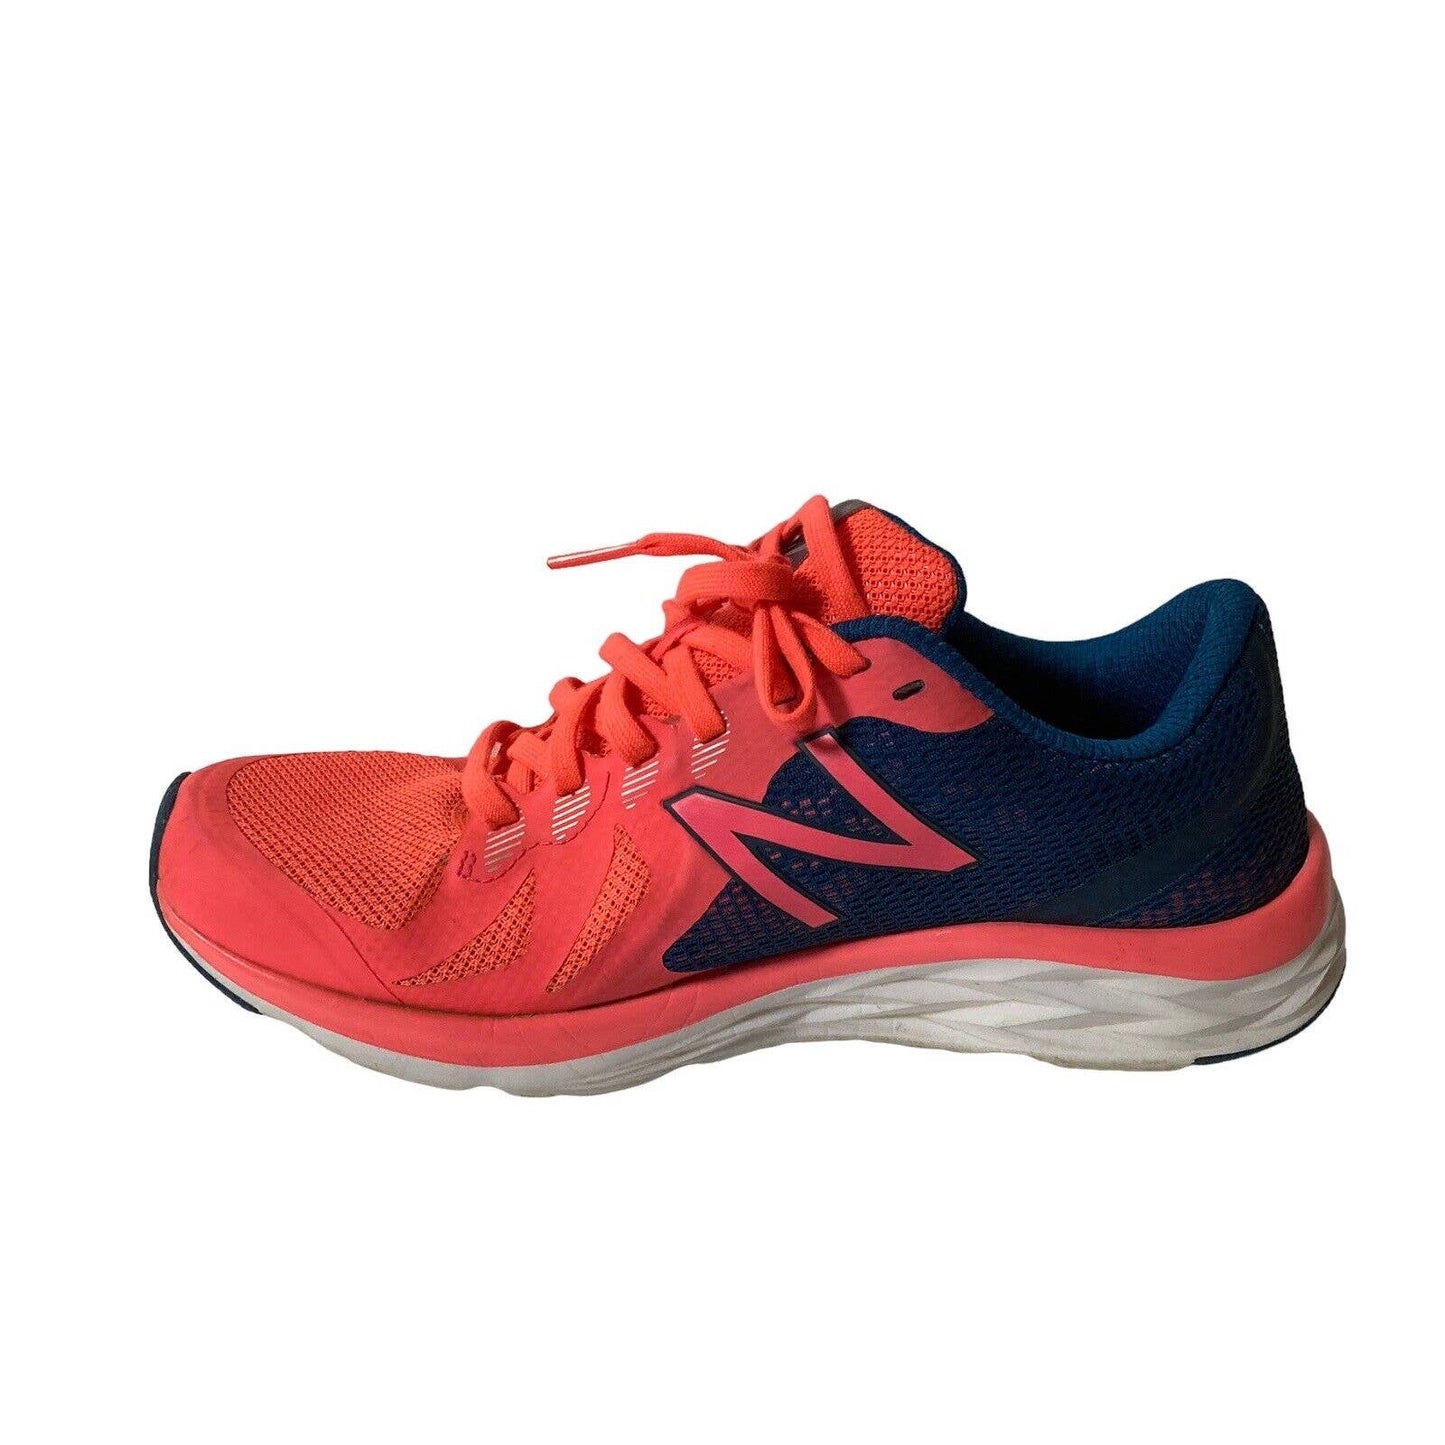 New Balance Womens 790 V6 W790LP6 Orange Running Shoes Sneakers Size 8